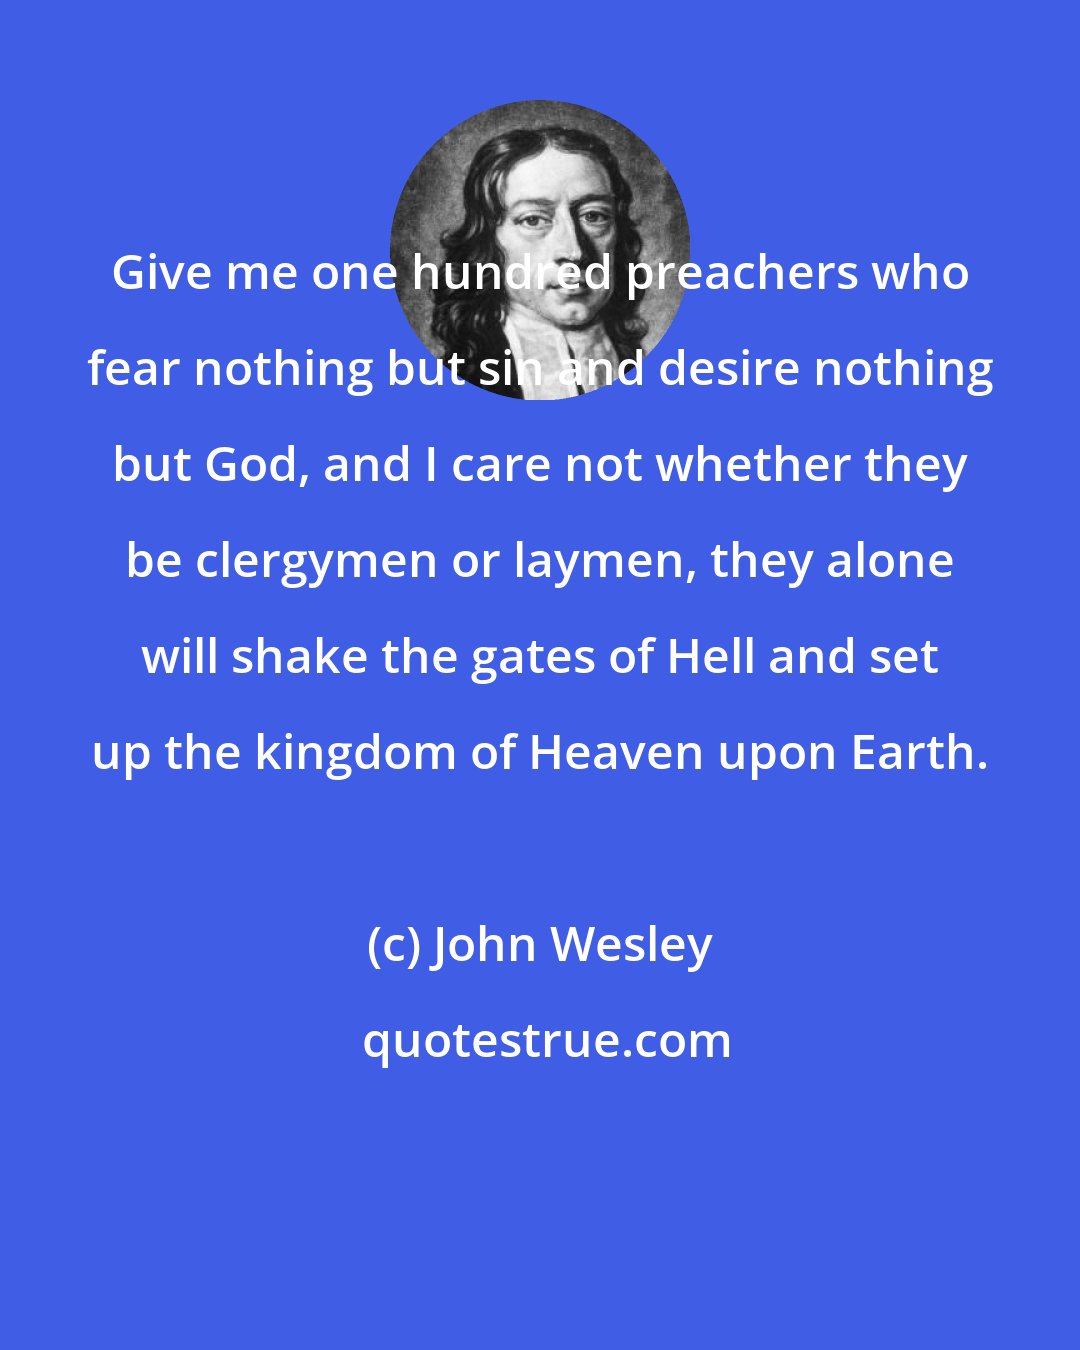 John Wesley: Give me one hundred preachers who fear nothing but sin and desire nothing but God, and I care not whether they be clergymen or laymen, they alone will shake the gates of Hell and set up the kingdom of Heaven upon Earth.